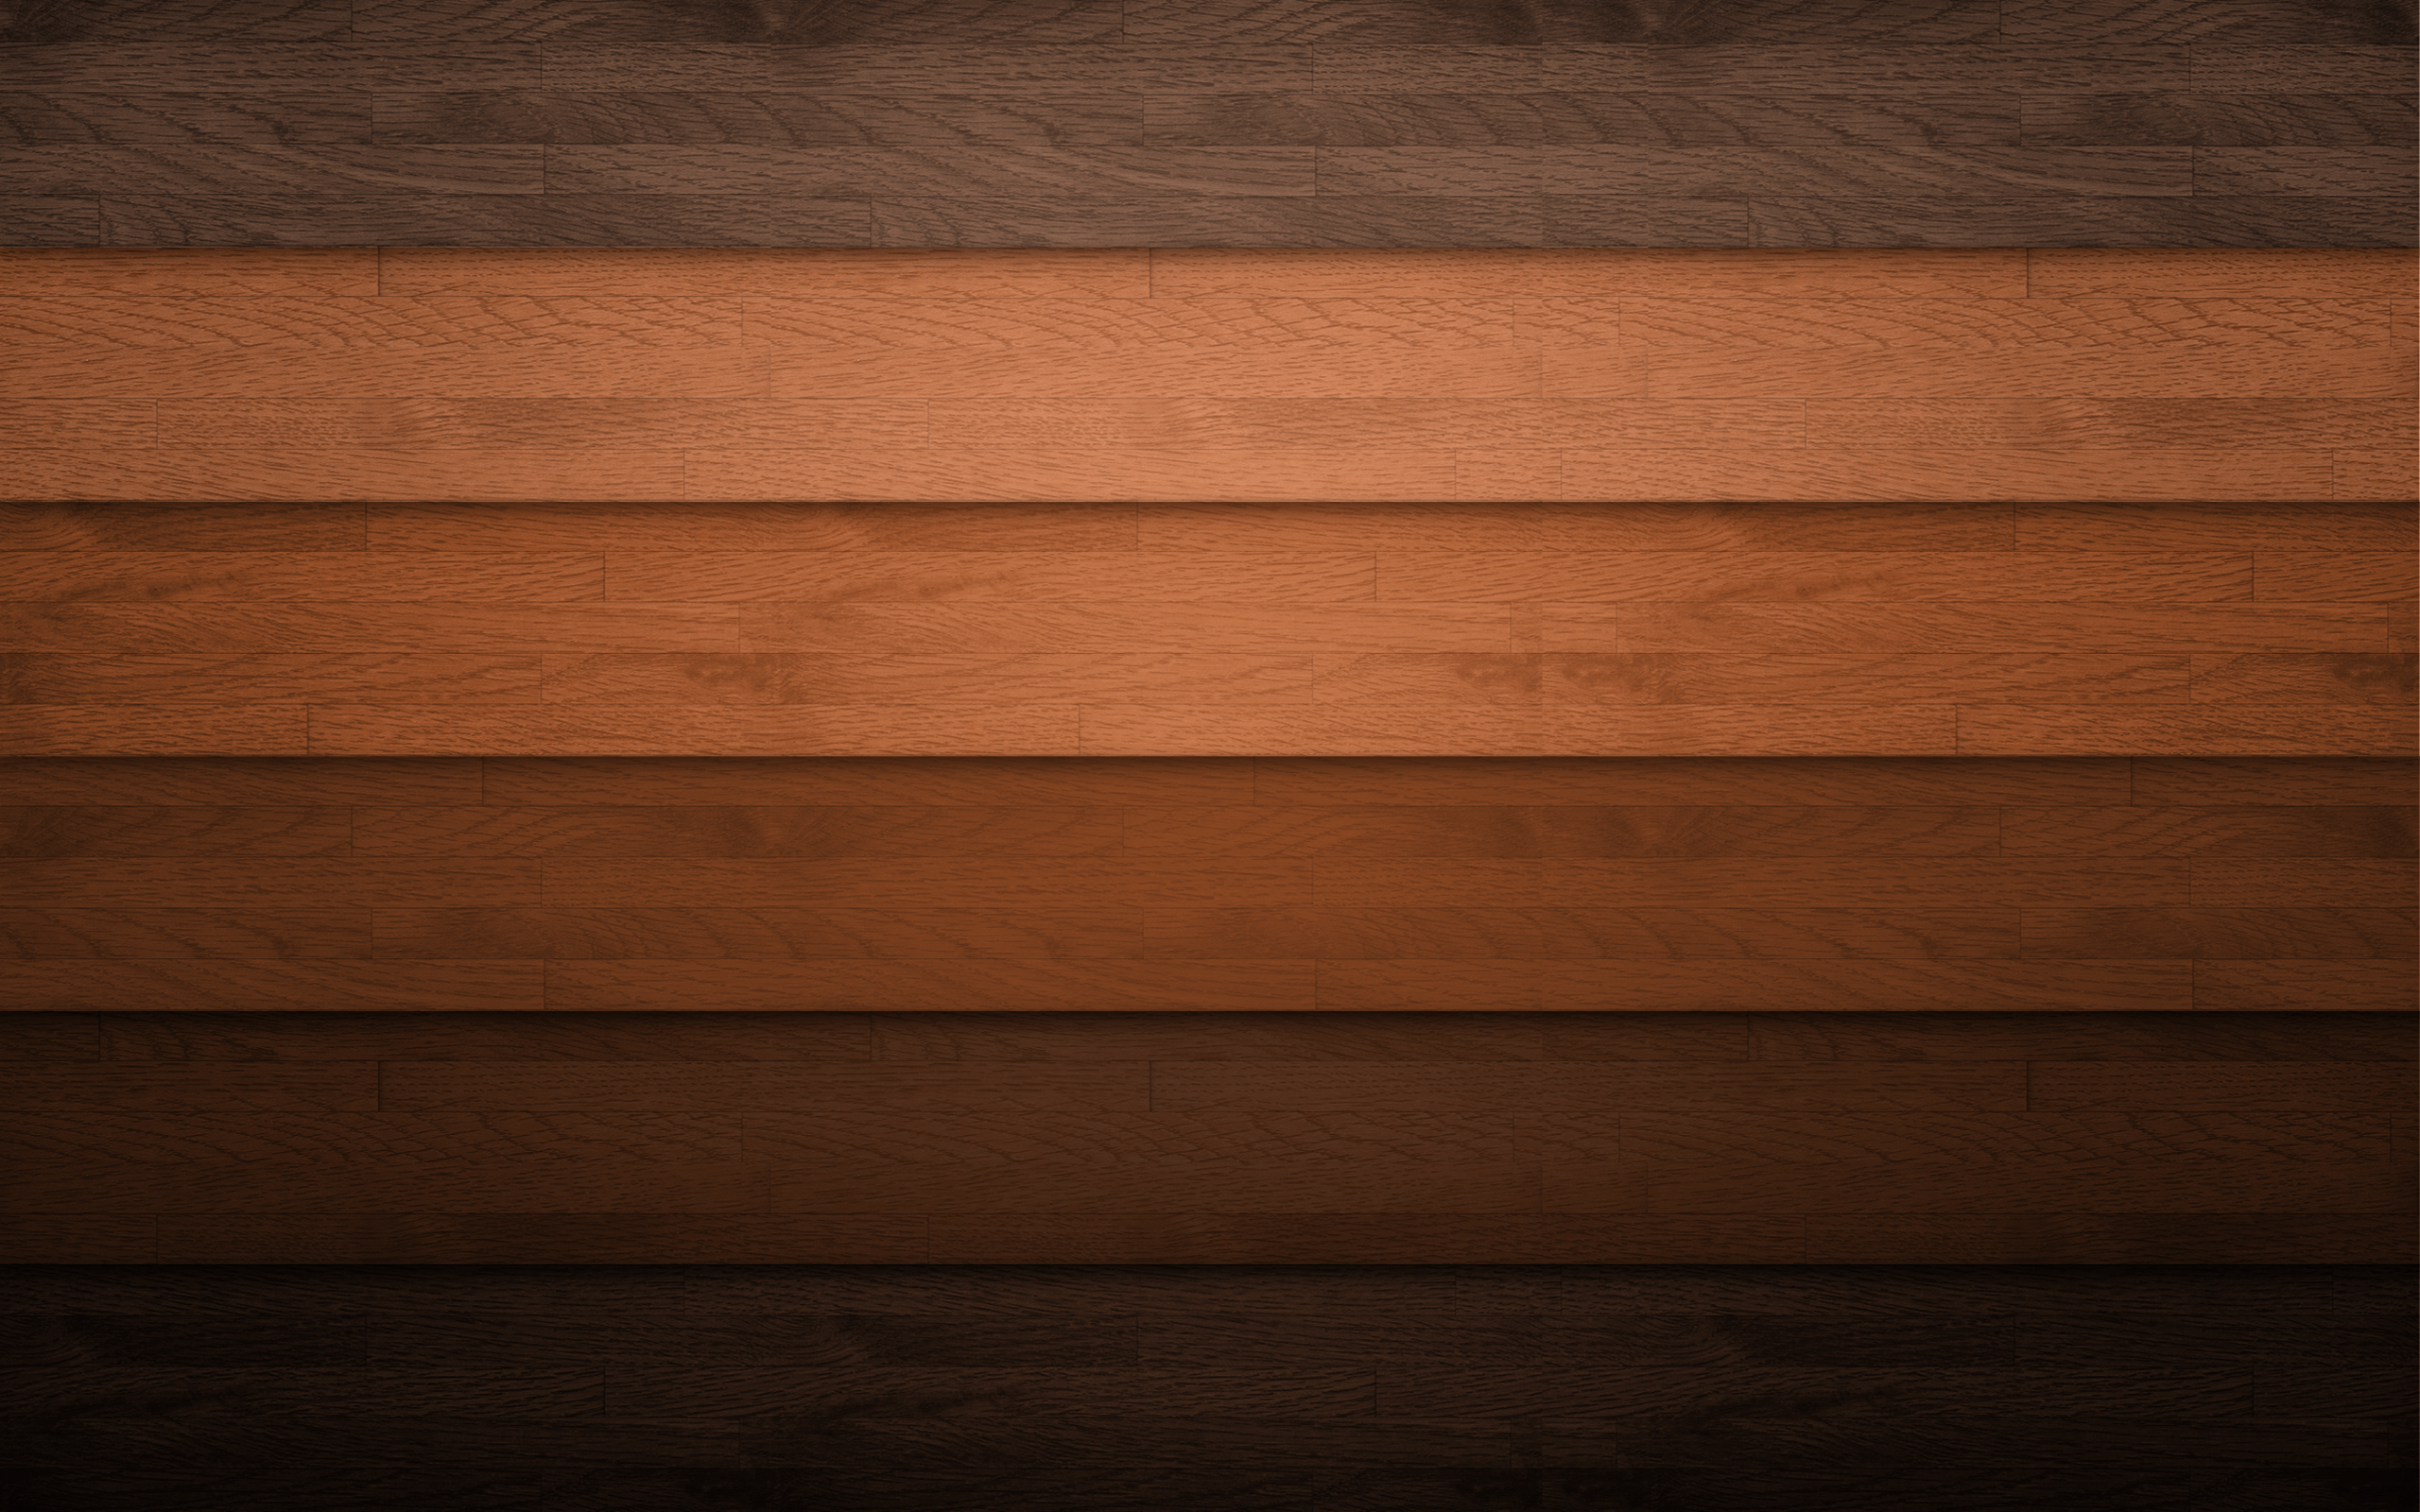 Full HD Wallpapers Backgrounds, Wood, Brown